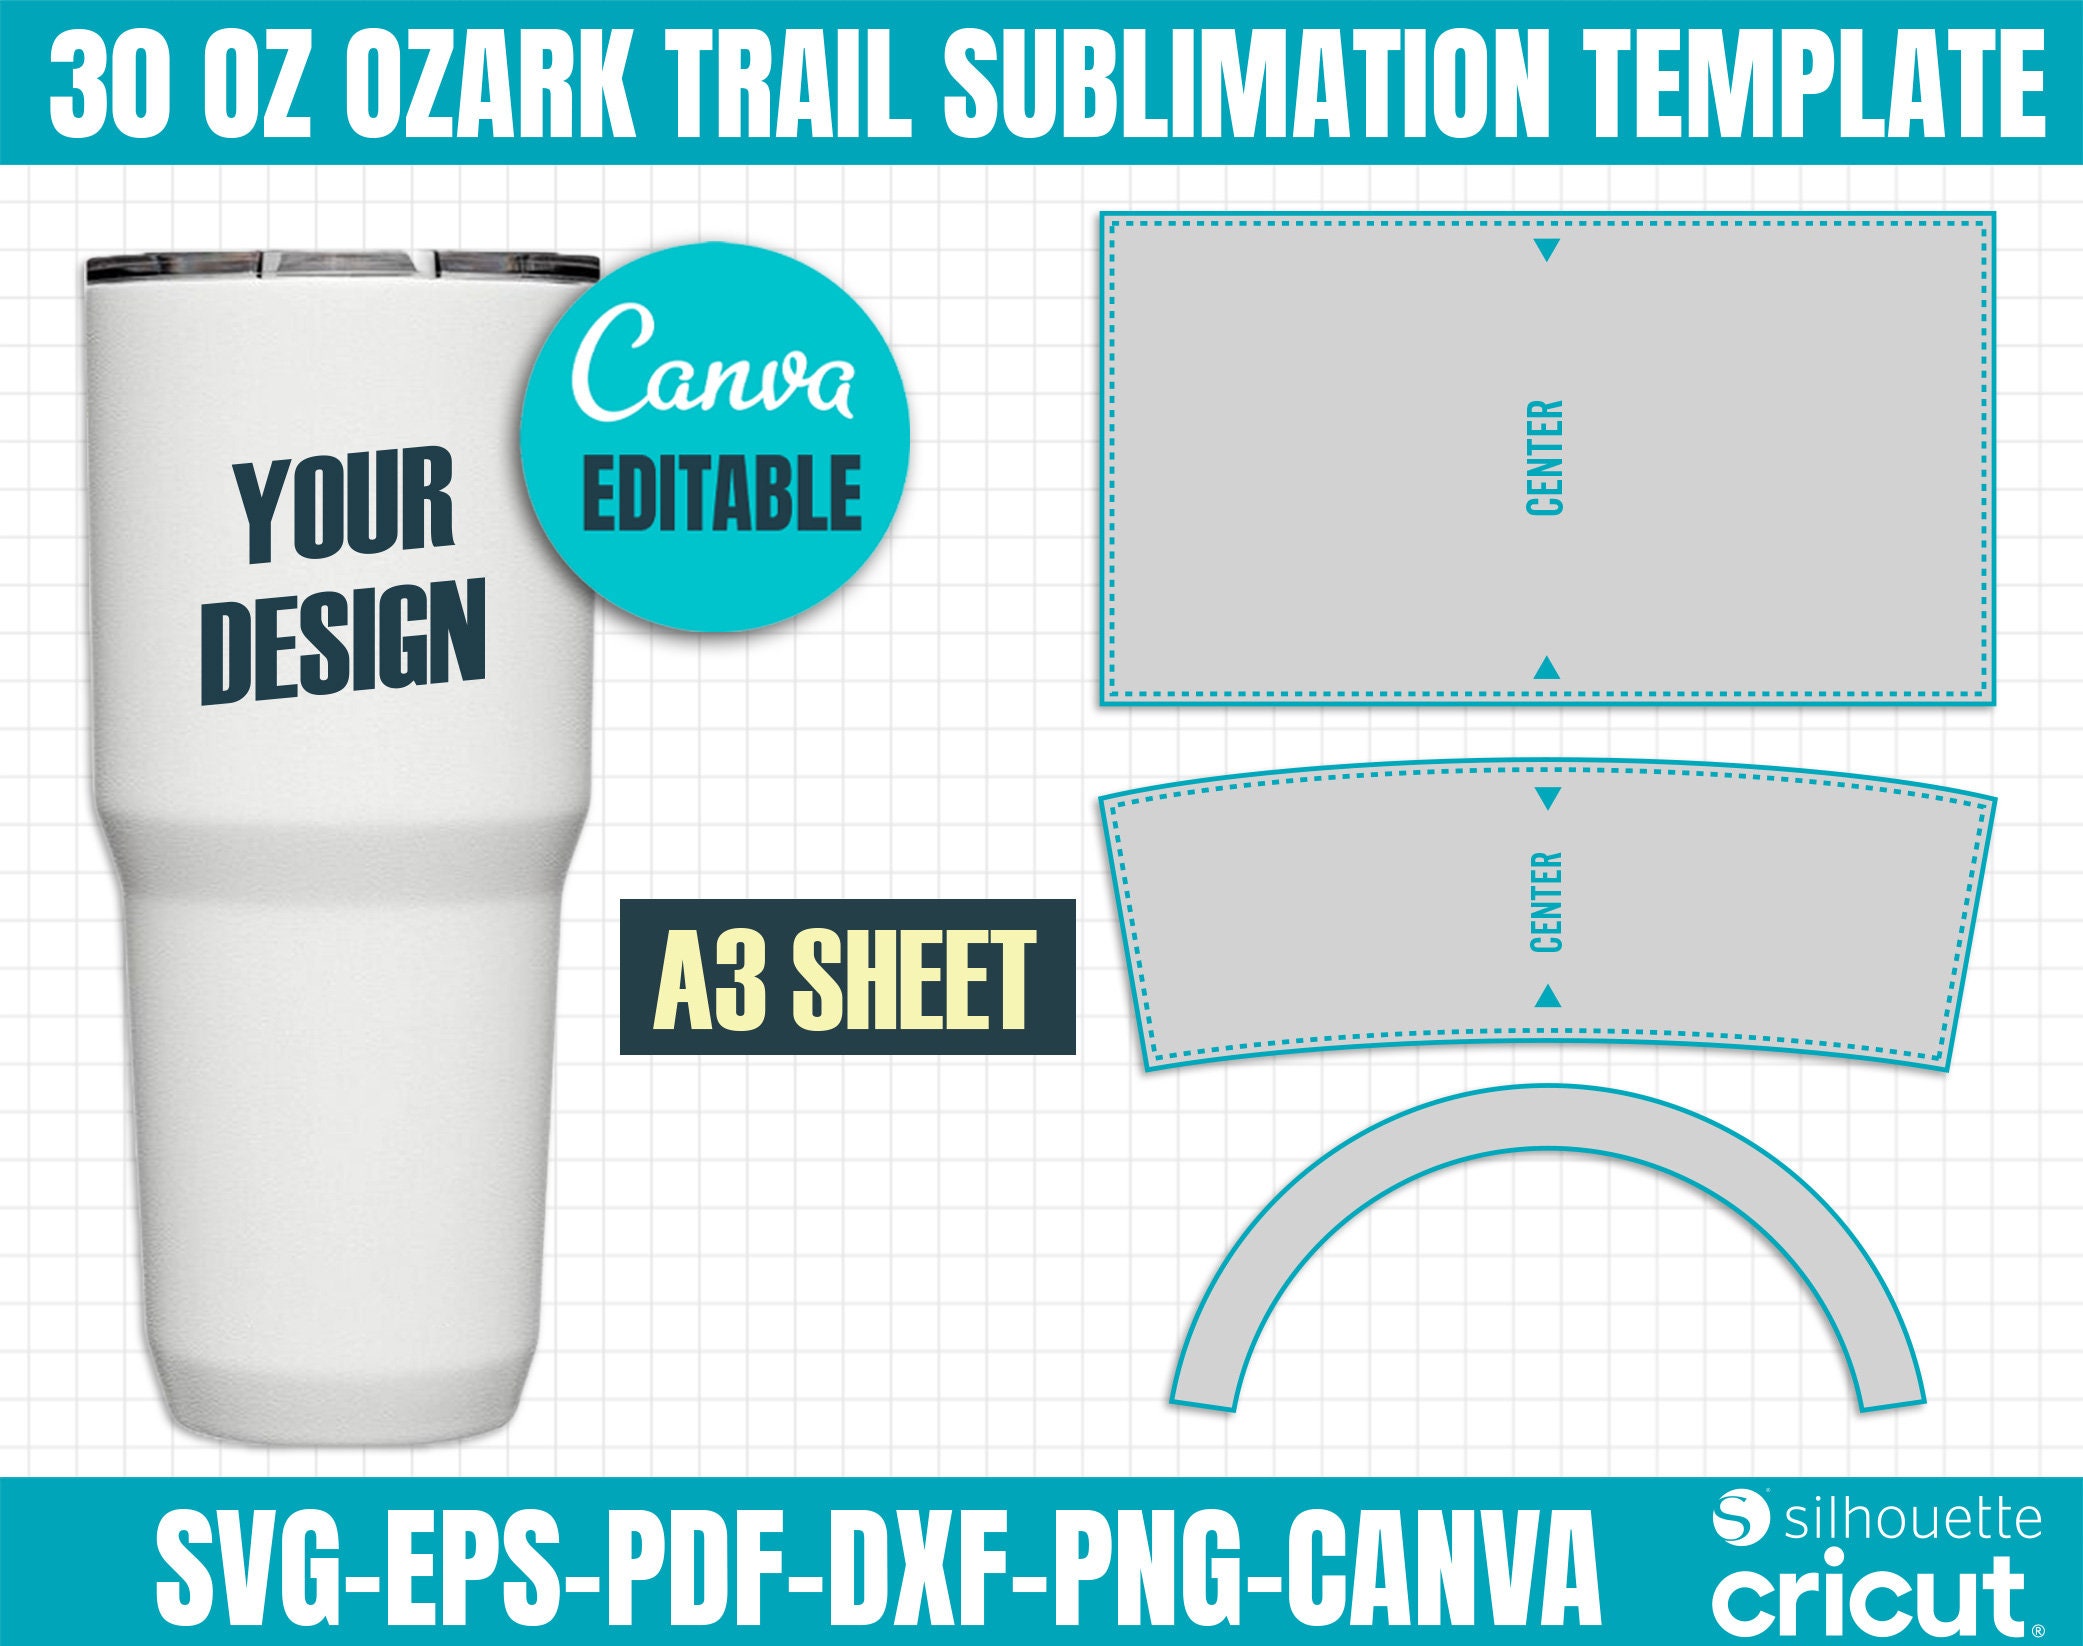 How to Make a Sublimation Tumbler Template in Canva - Silhouette